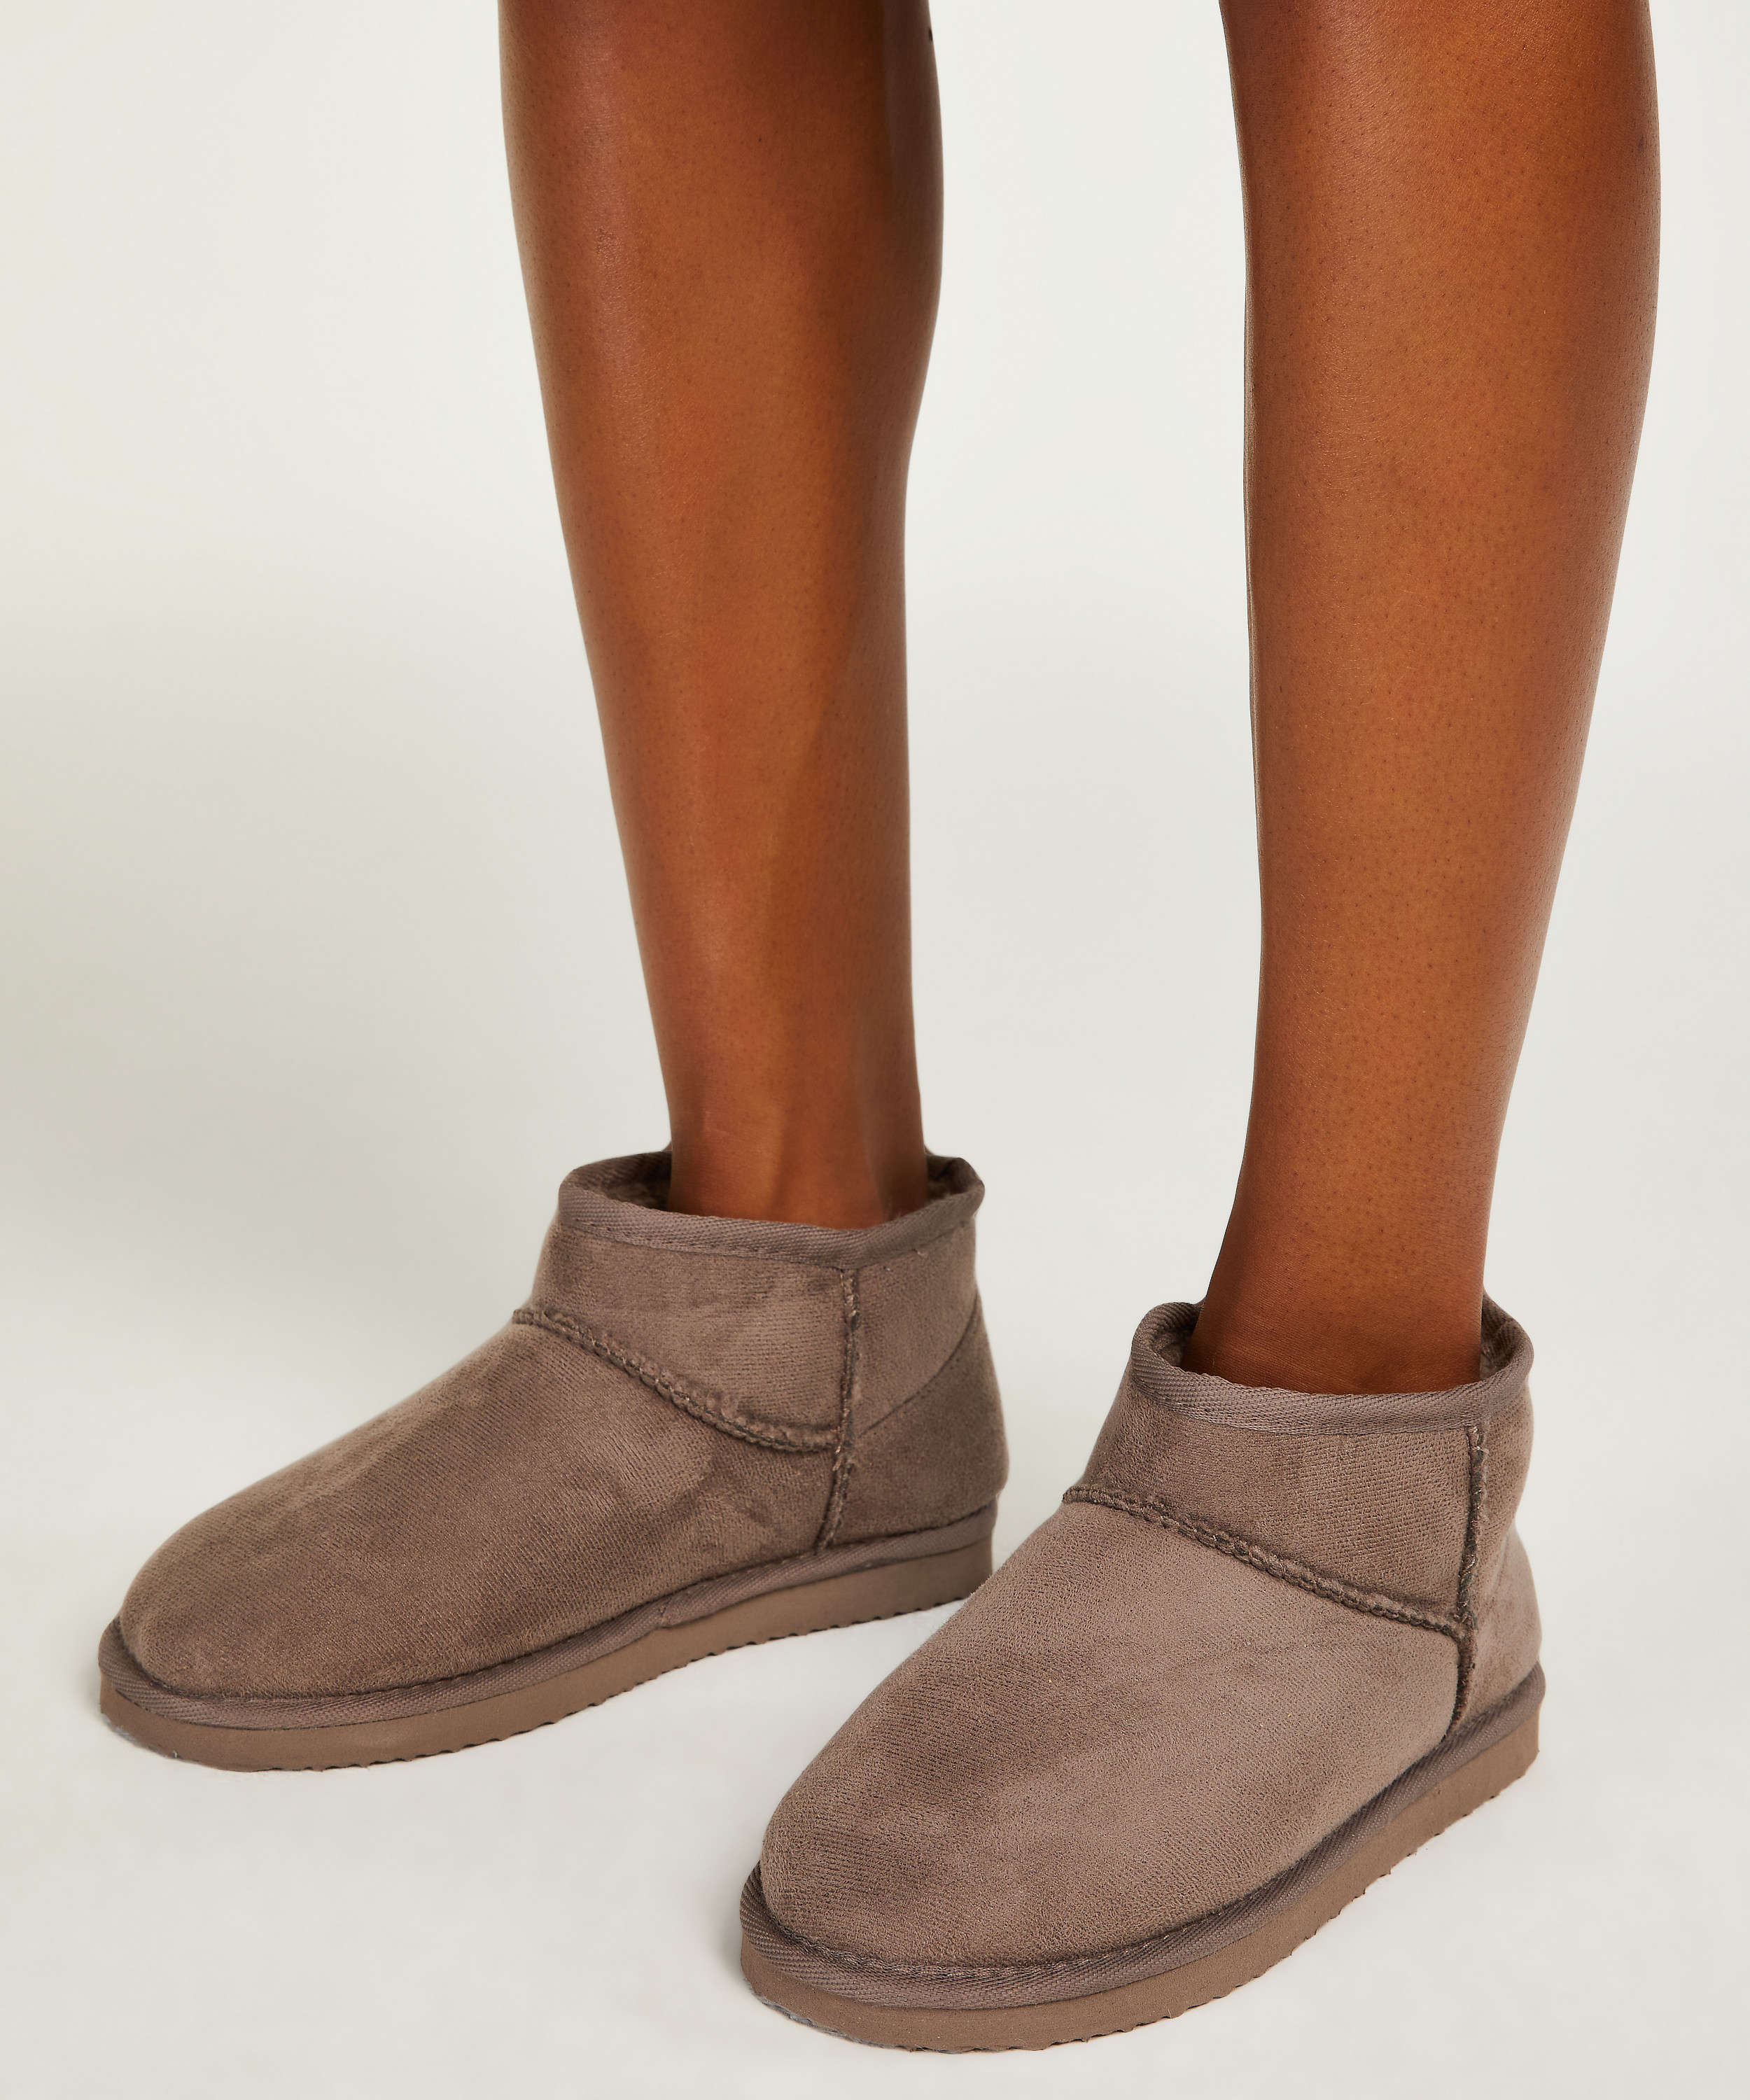 Lea Faux Suede Slippers, Brown, main